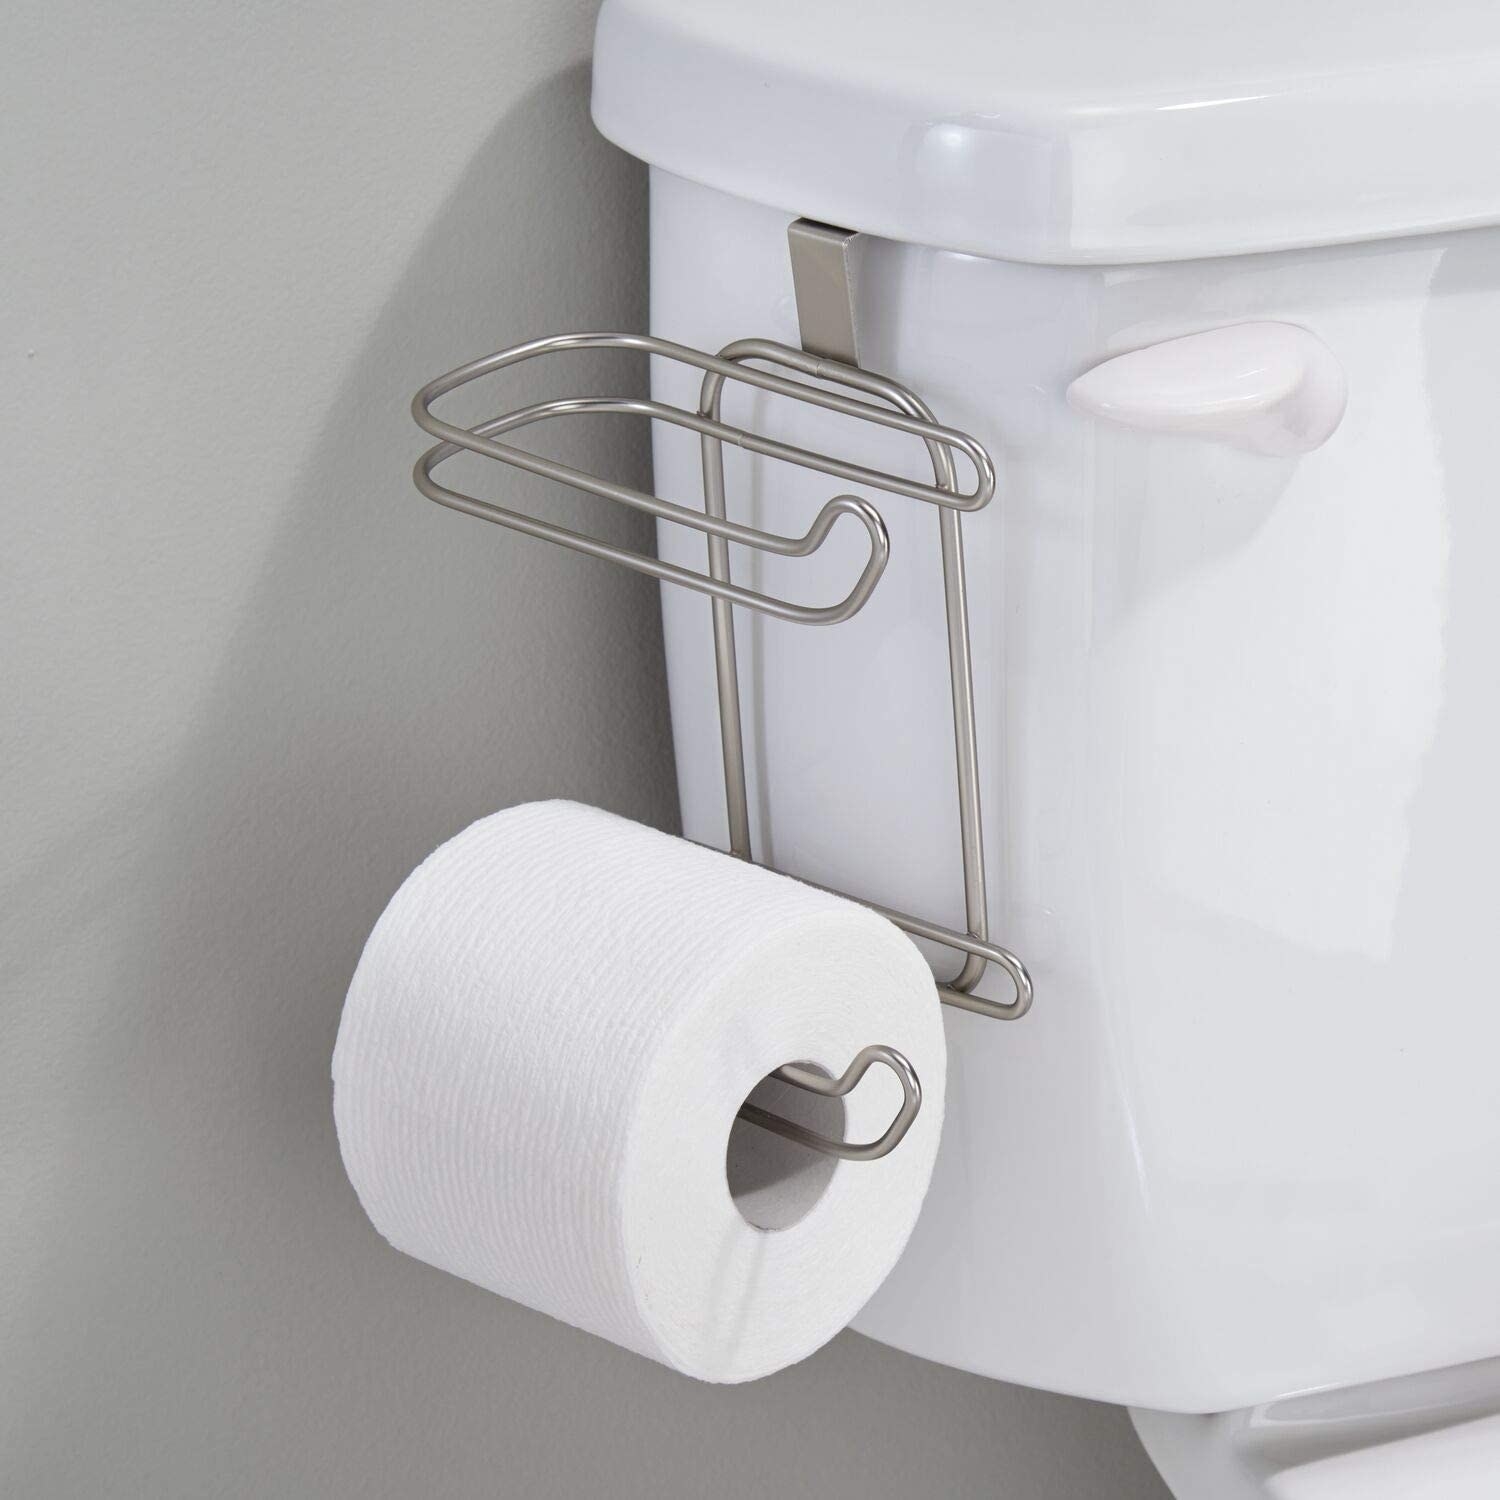 A roll of toilet paper placed on a hook that is hanging from the tank of a toilet